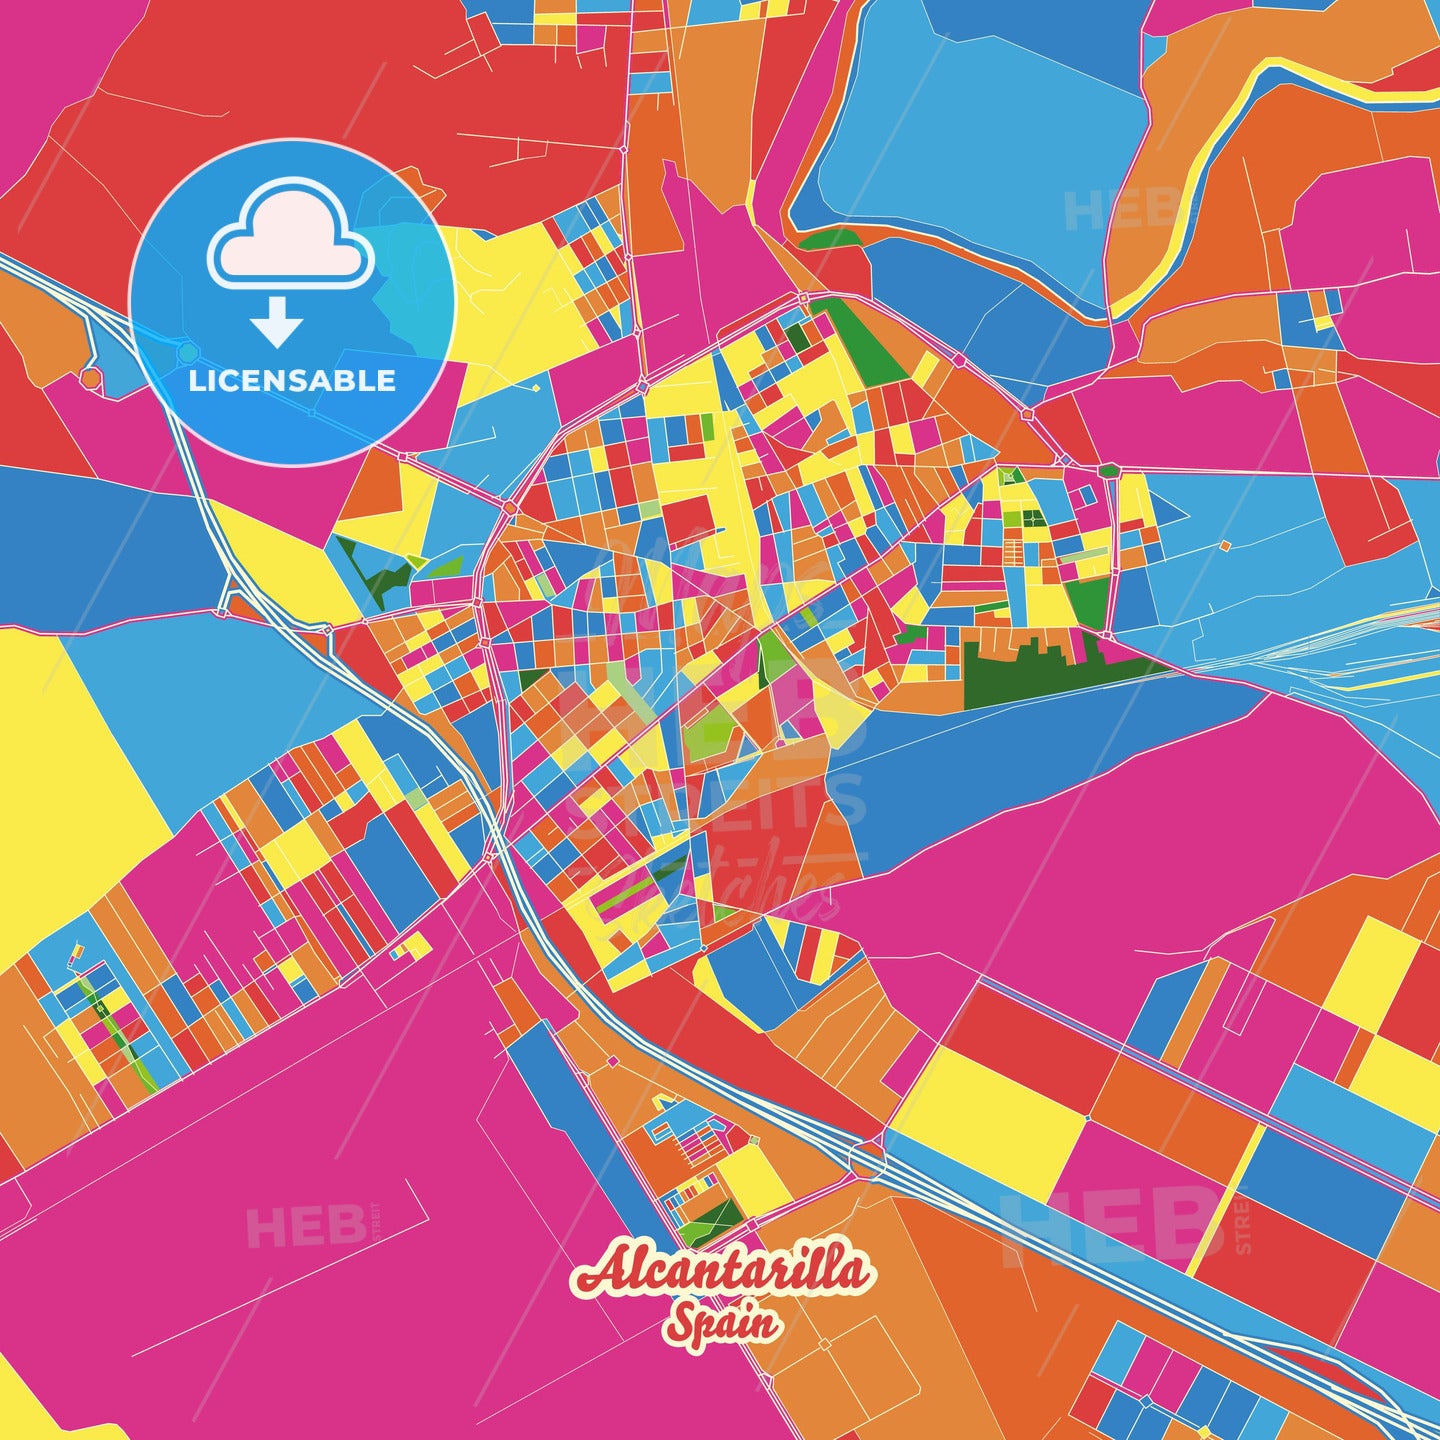 Alcantarilla, Spain Crazy Colorful Street Map Poster Template - HEBSTREITS Sketches